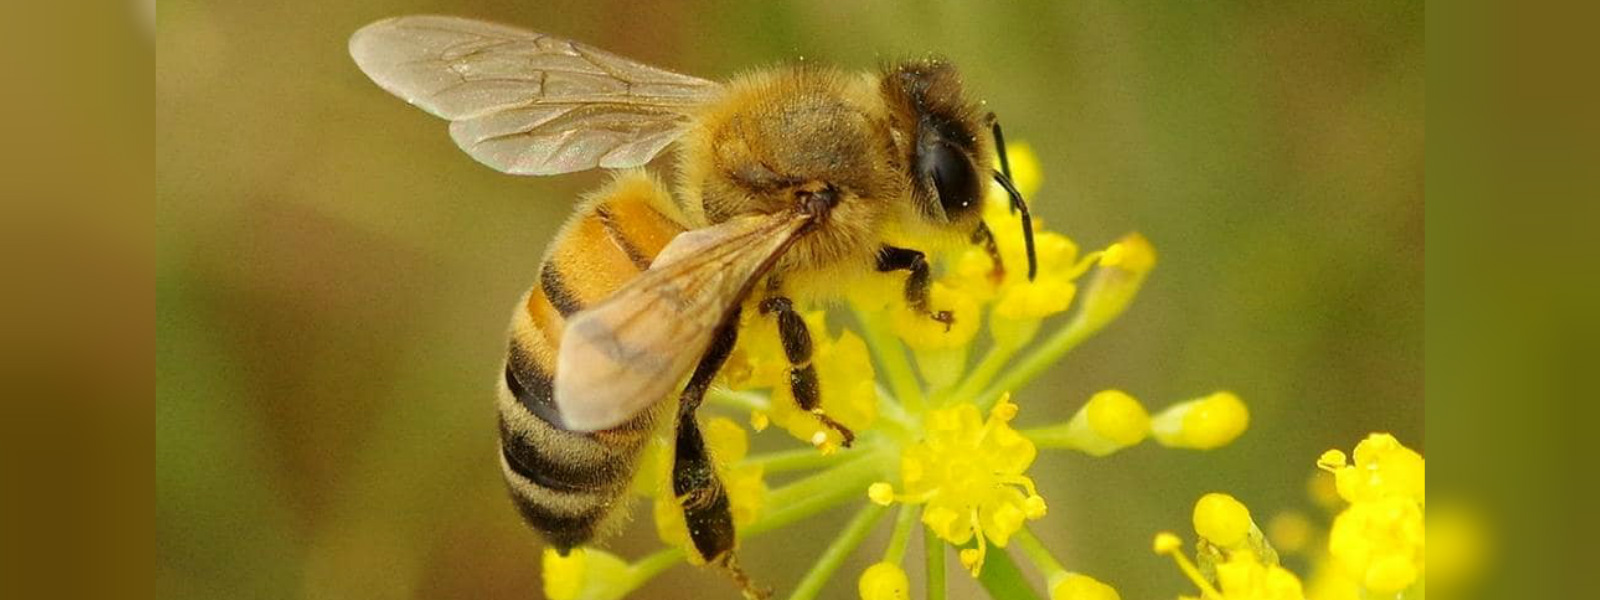 11 people in Bogawanthalawa attacked by bees